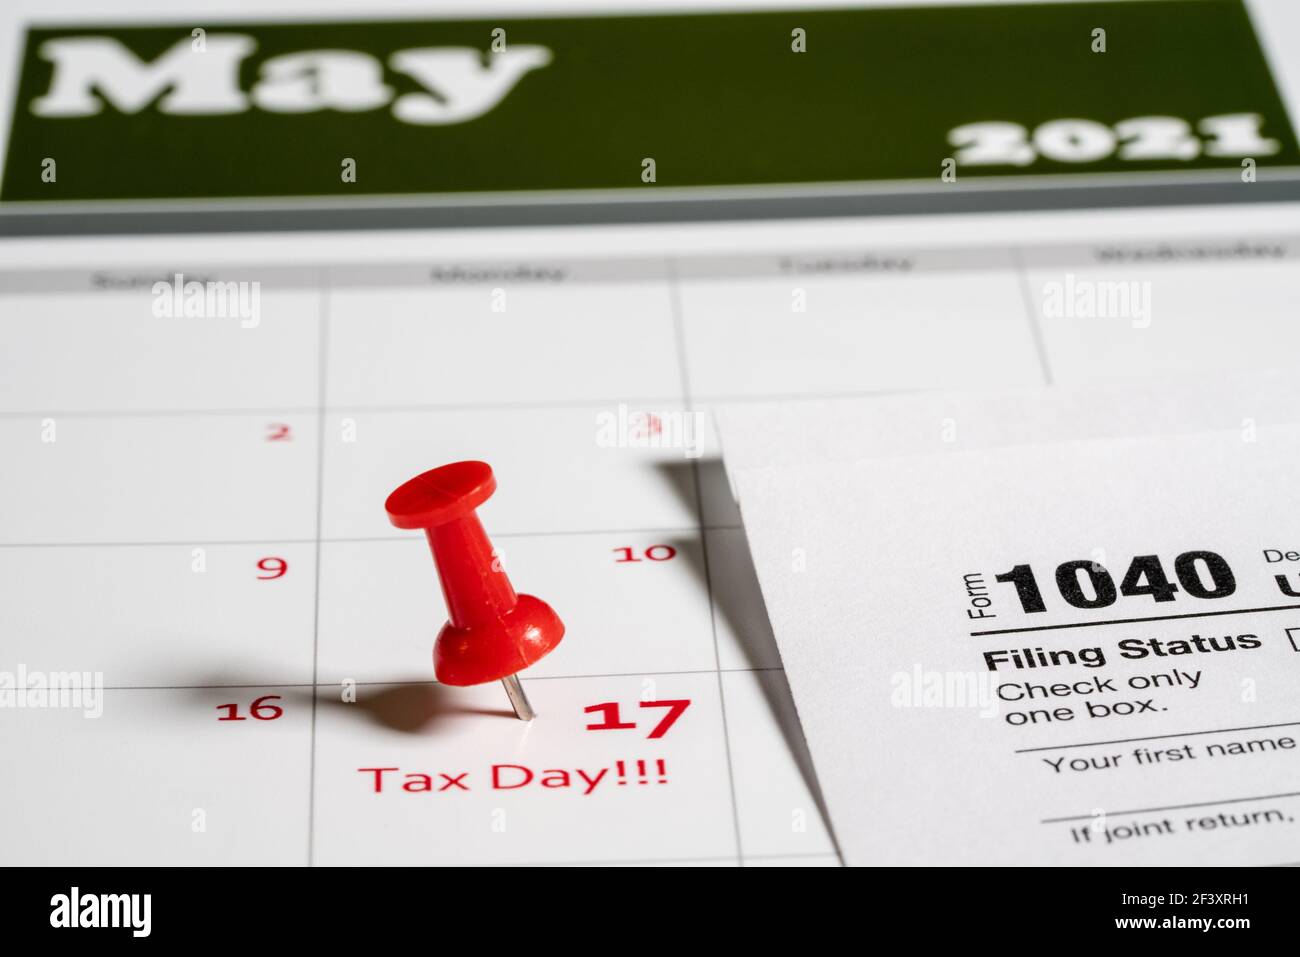 Calendar with Tax Day note inserted in the date for May 17 to illustrate the new tax return filing date of 17th May 2021. Stock Photo